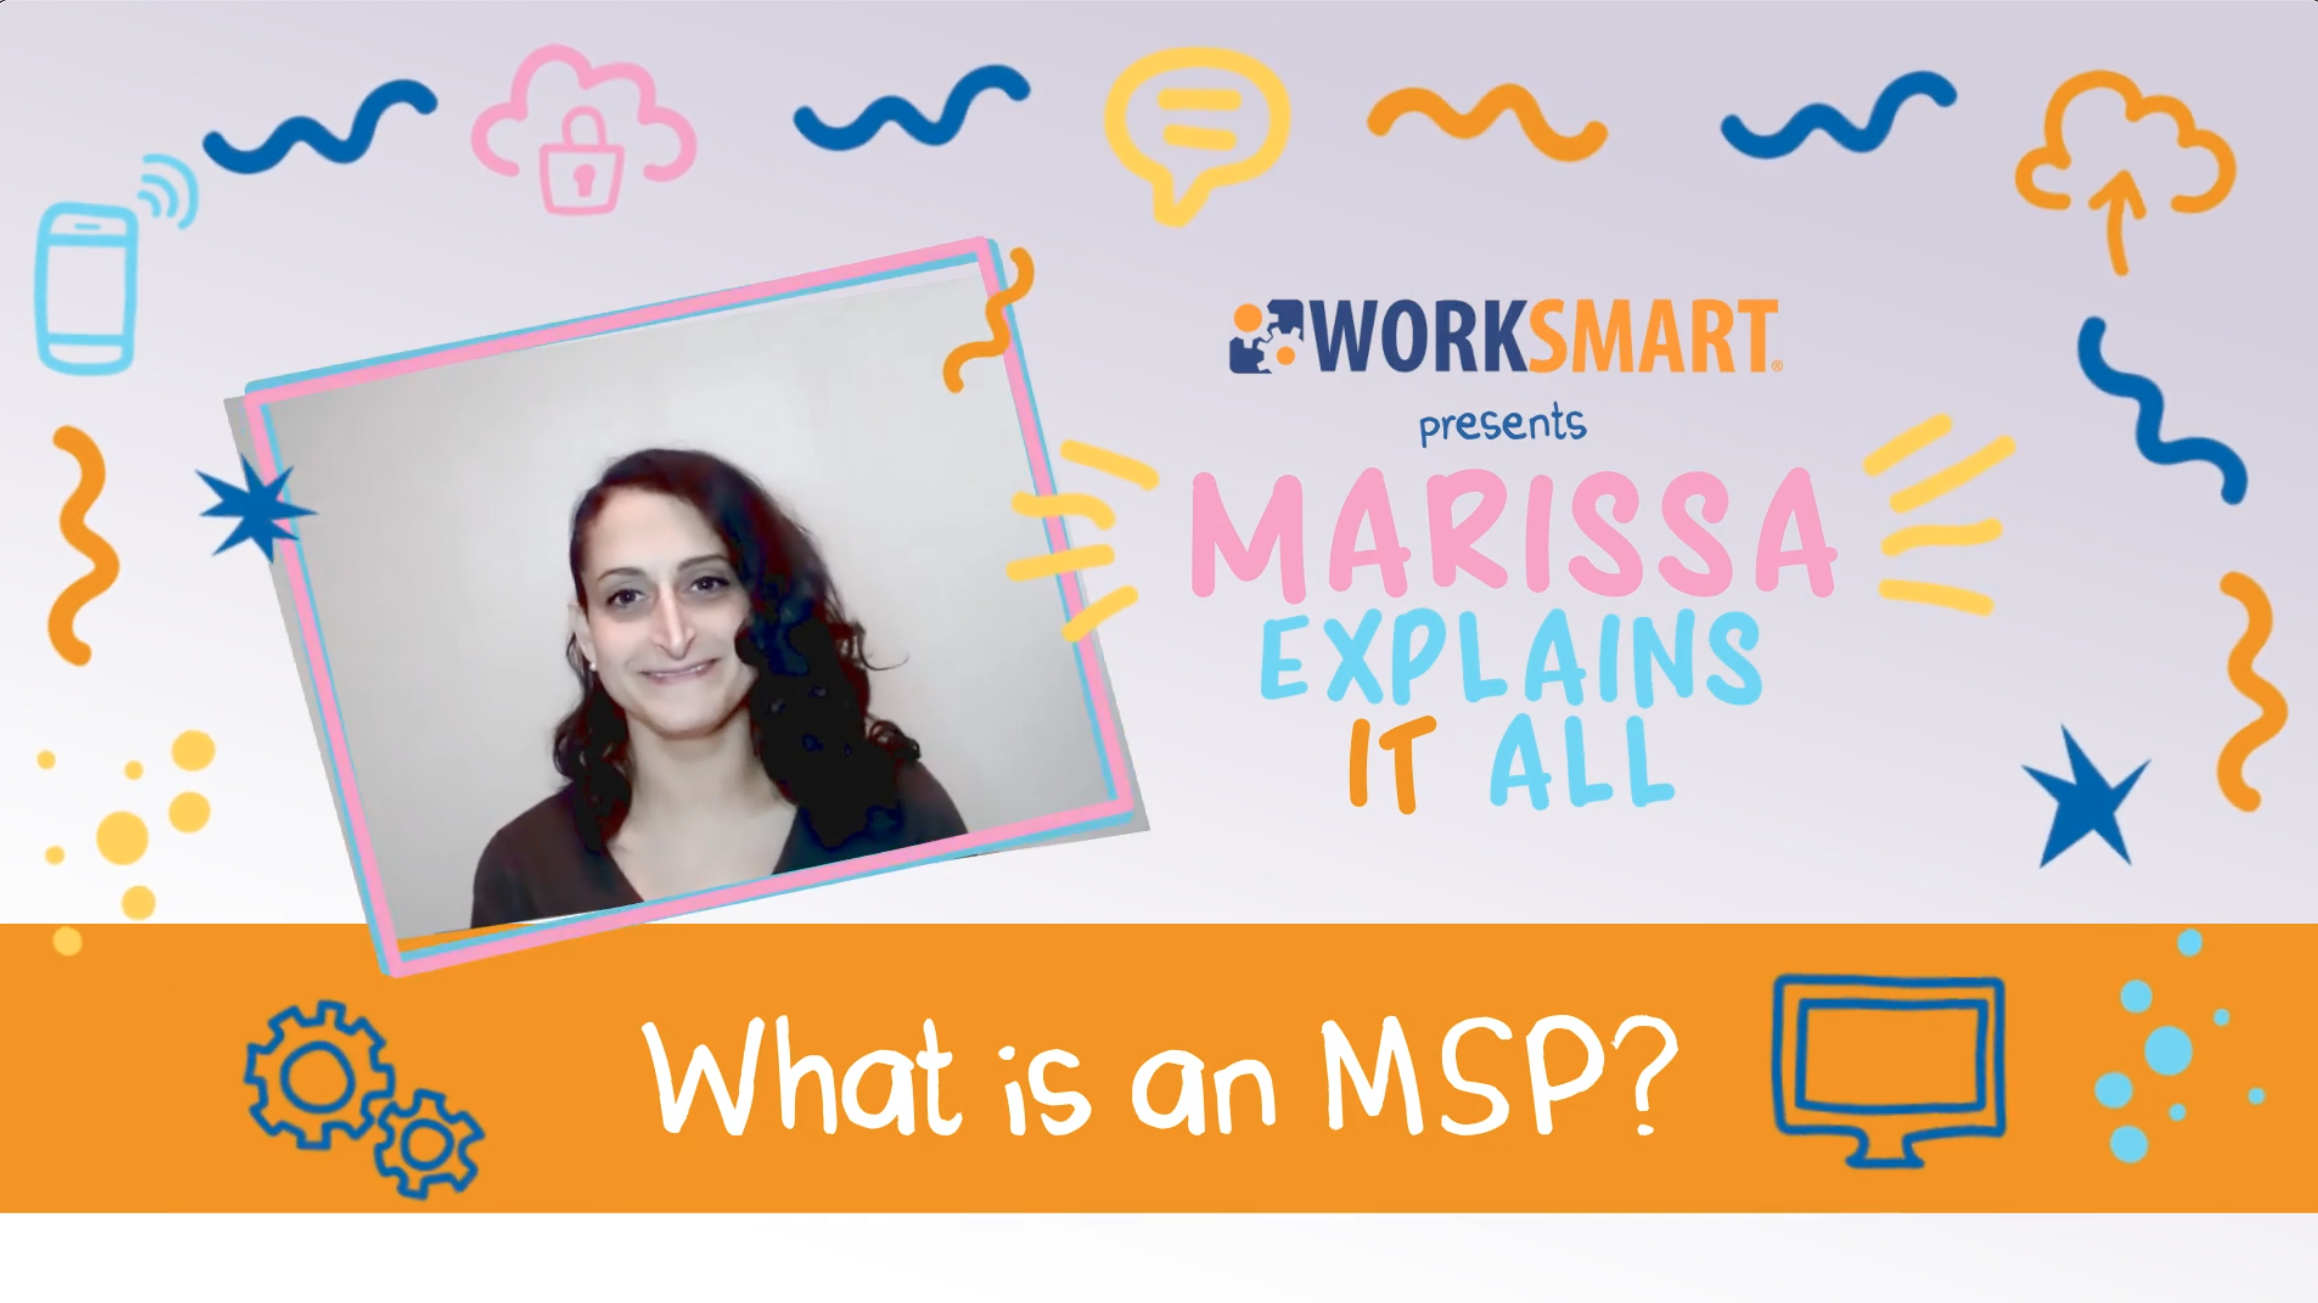 Marissa Explains IT All: What is an MSP?